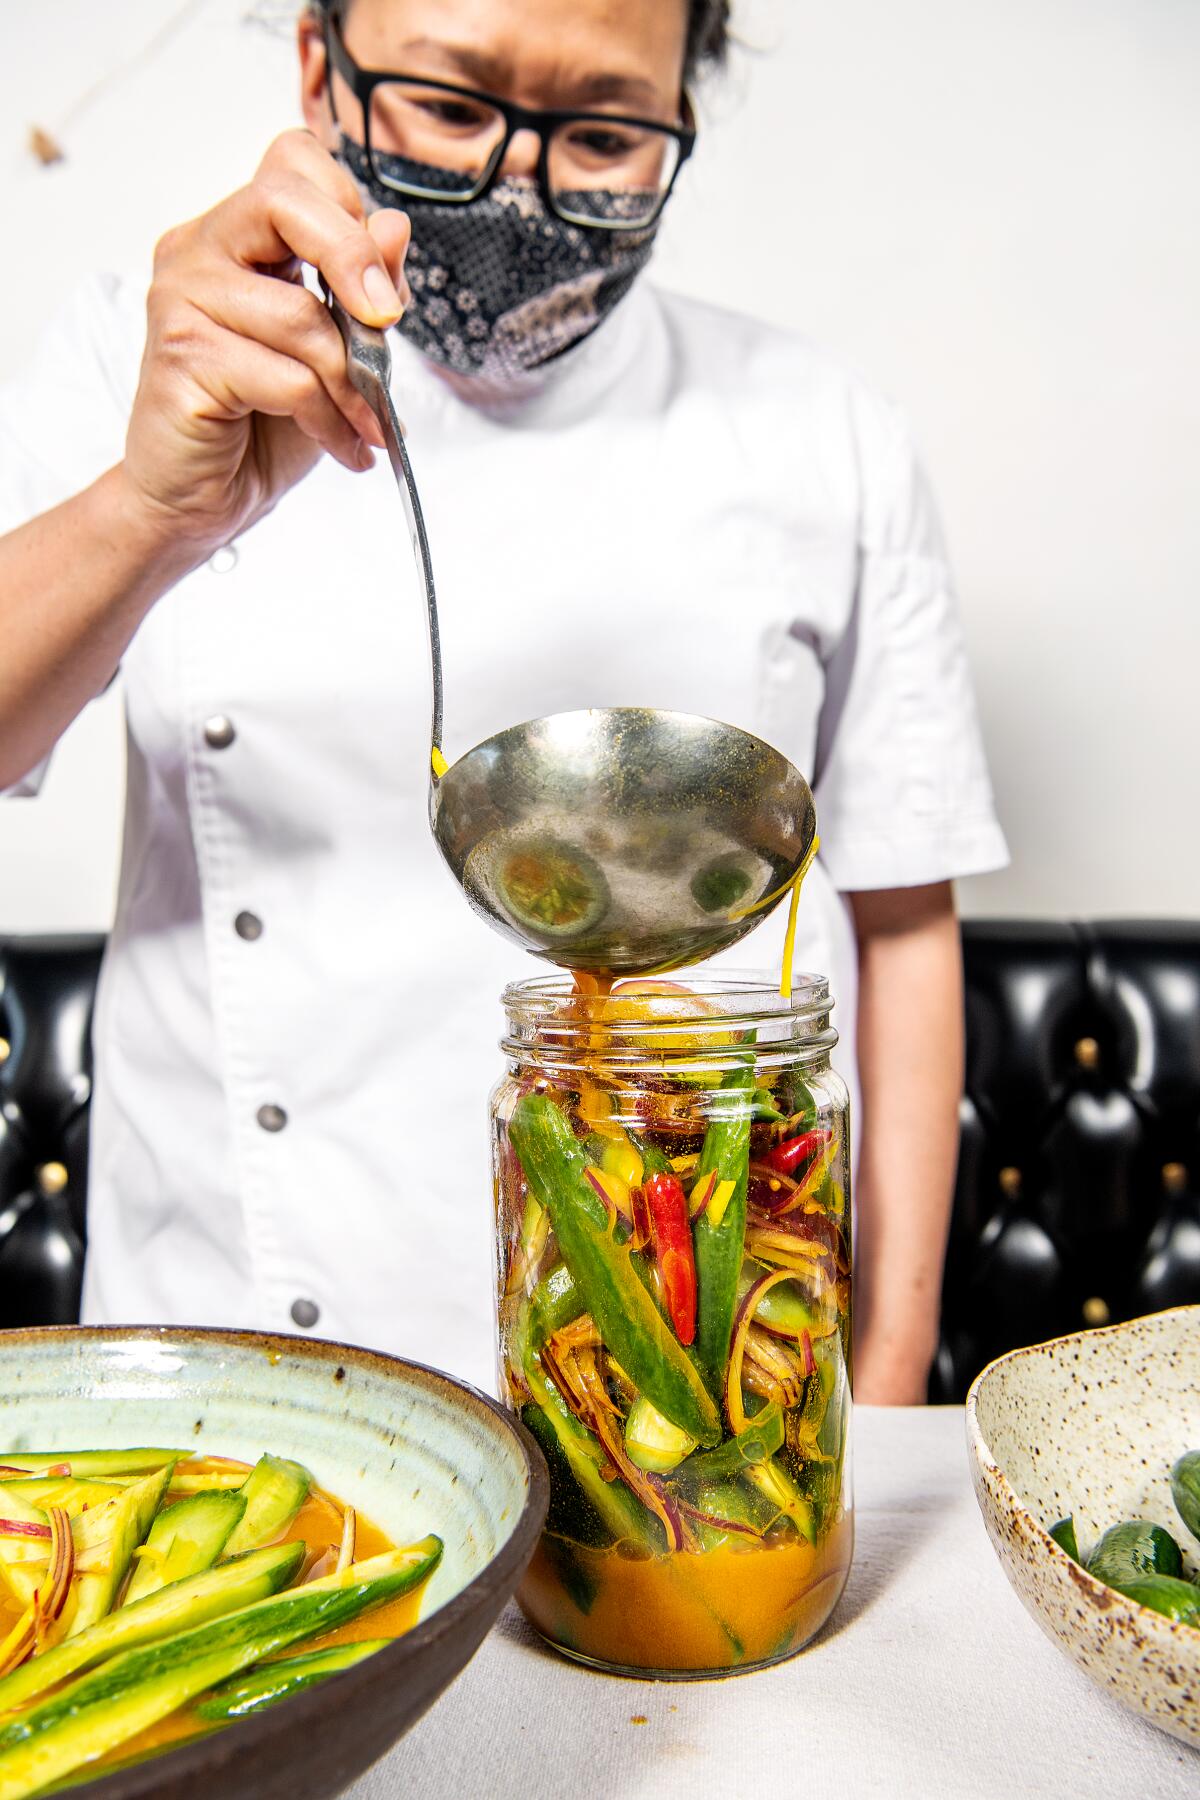 Minh Phan makes bread-and-butter pickles at her restaurant Porridge + Puffs. 